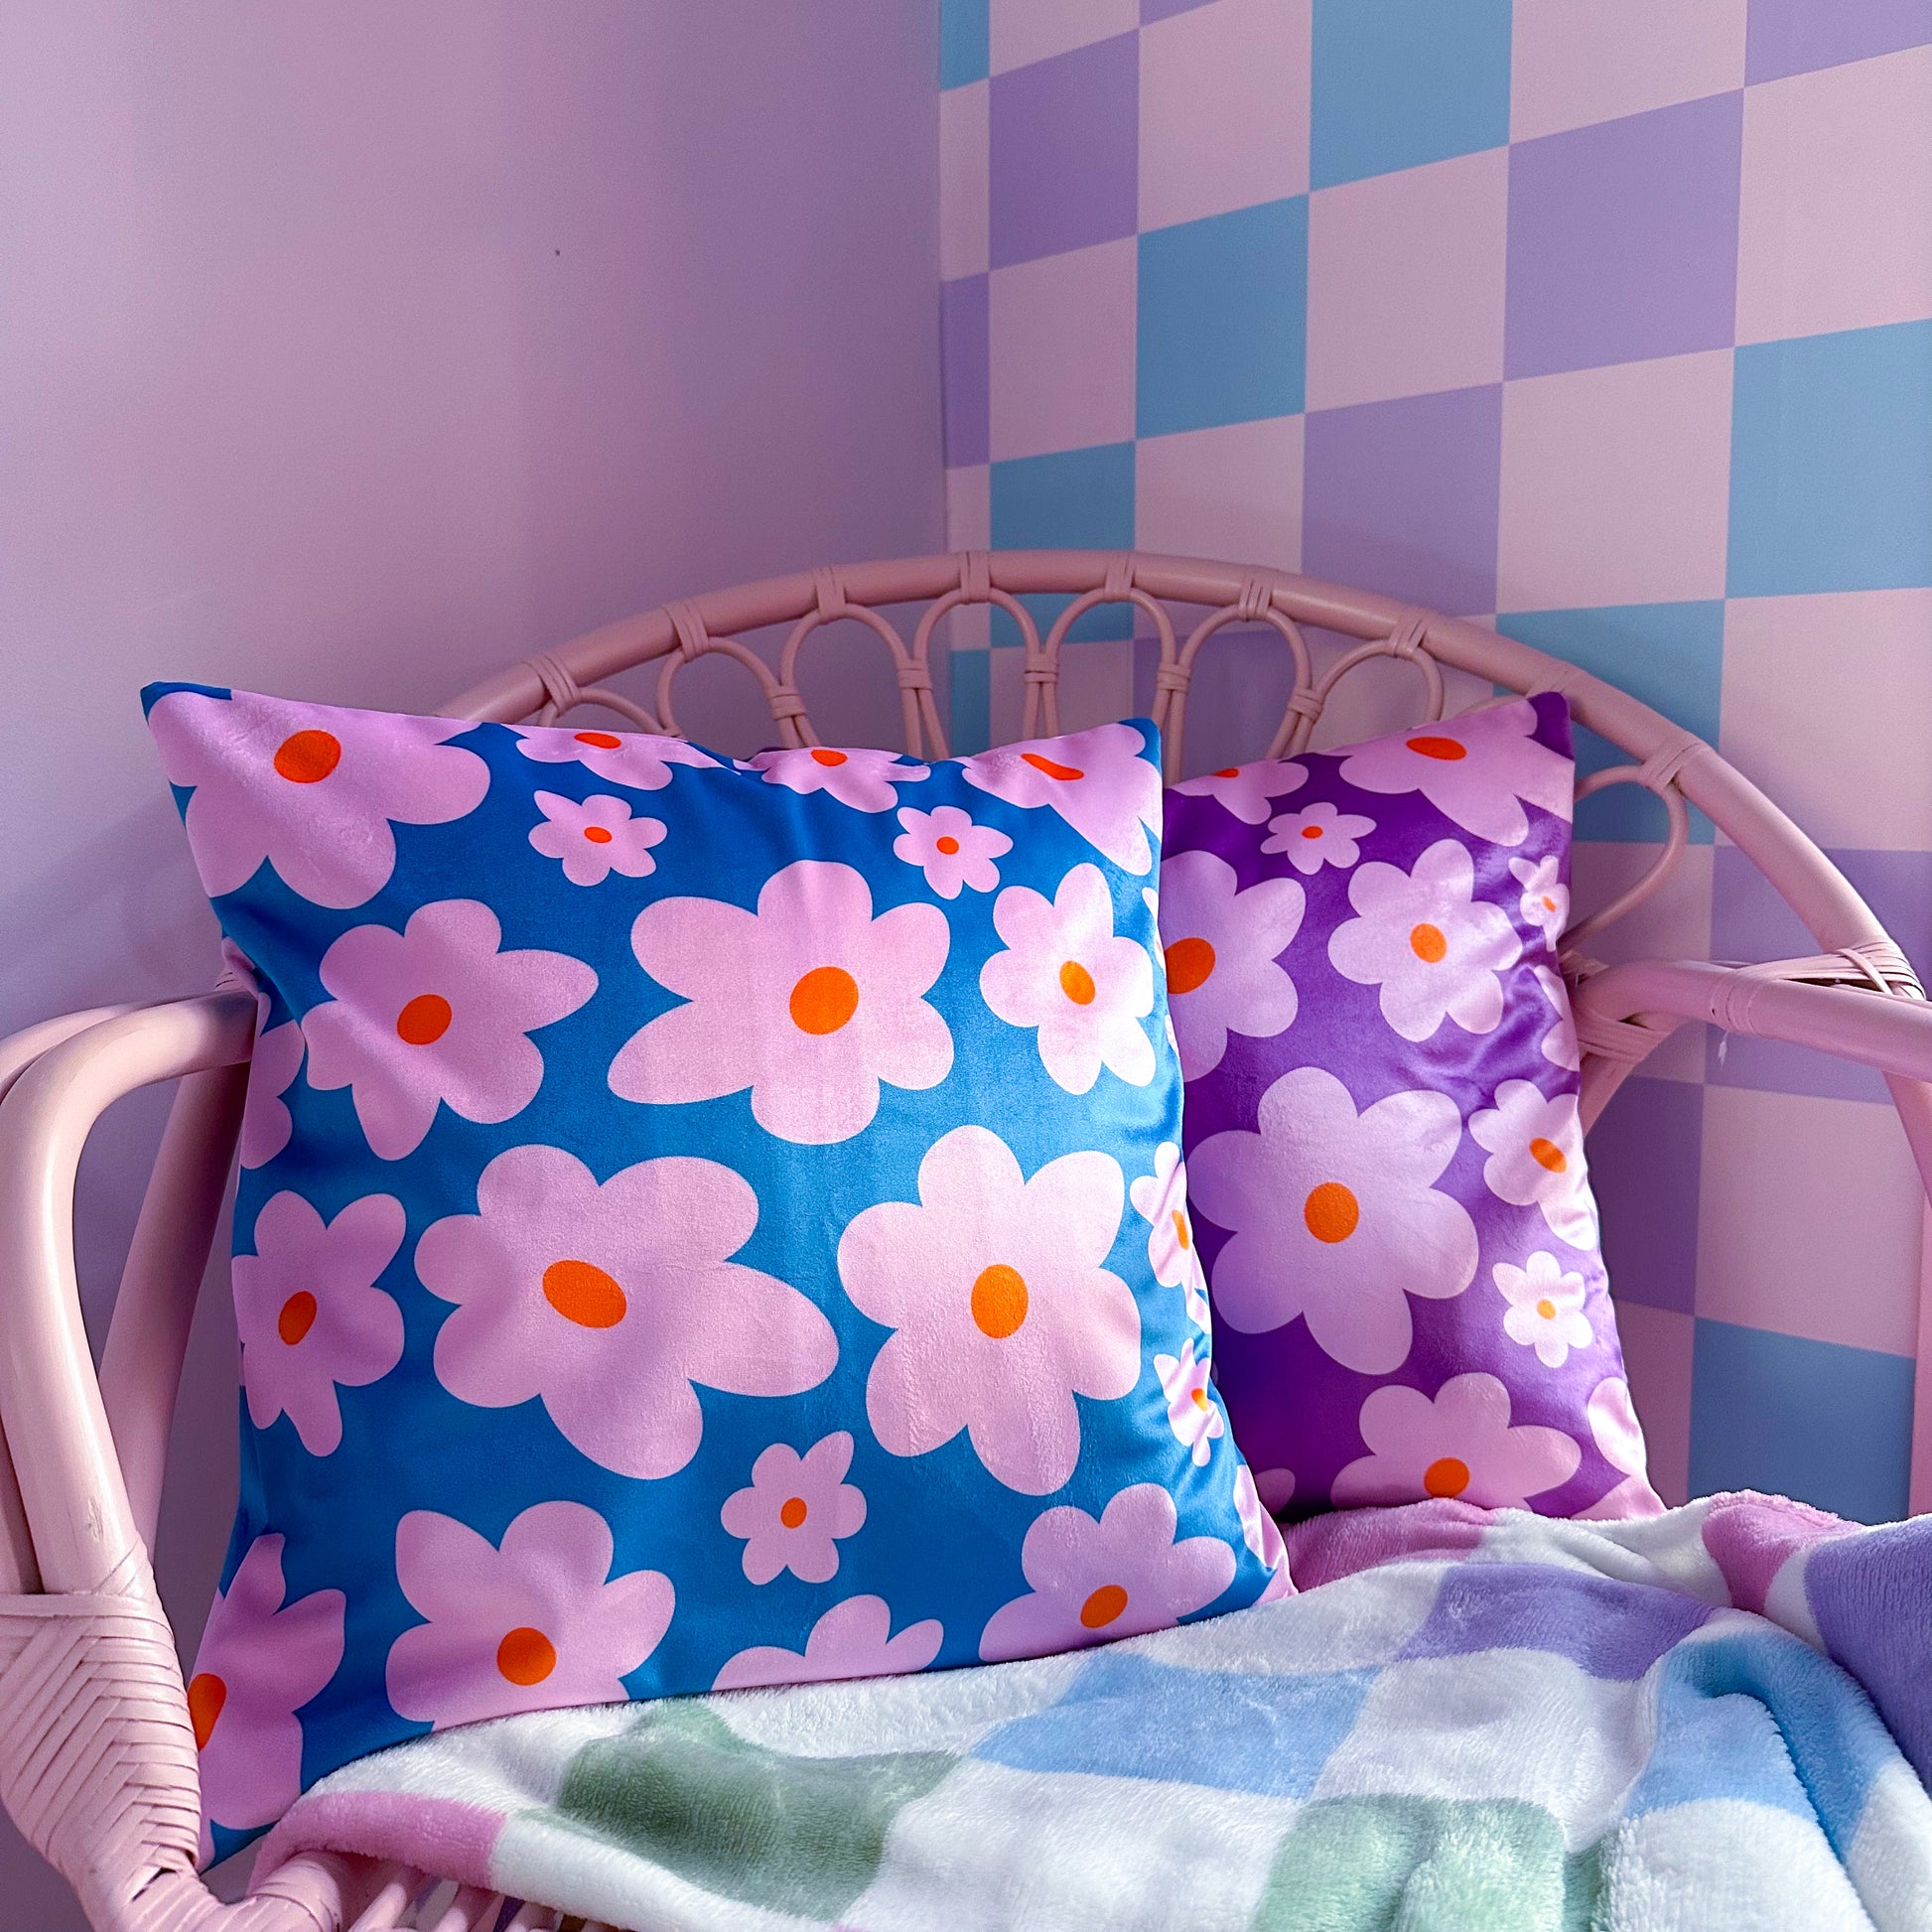 velvet cushions daisy motif in pink, purple and blue colours